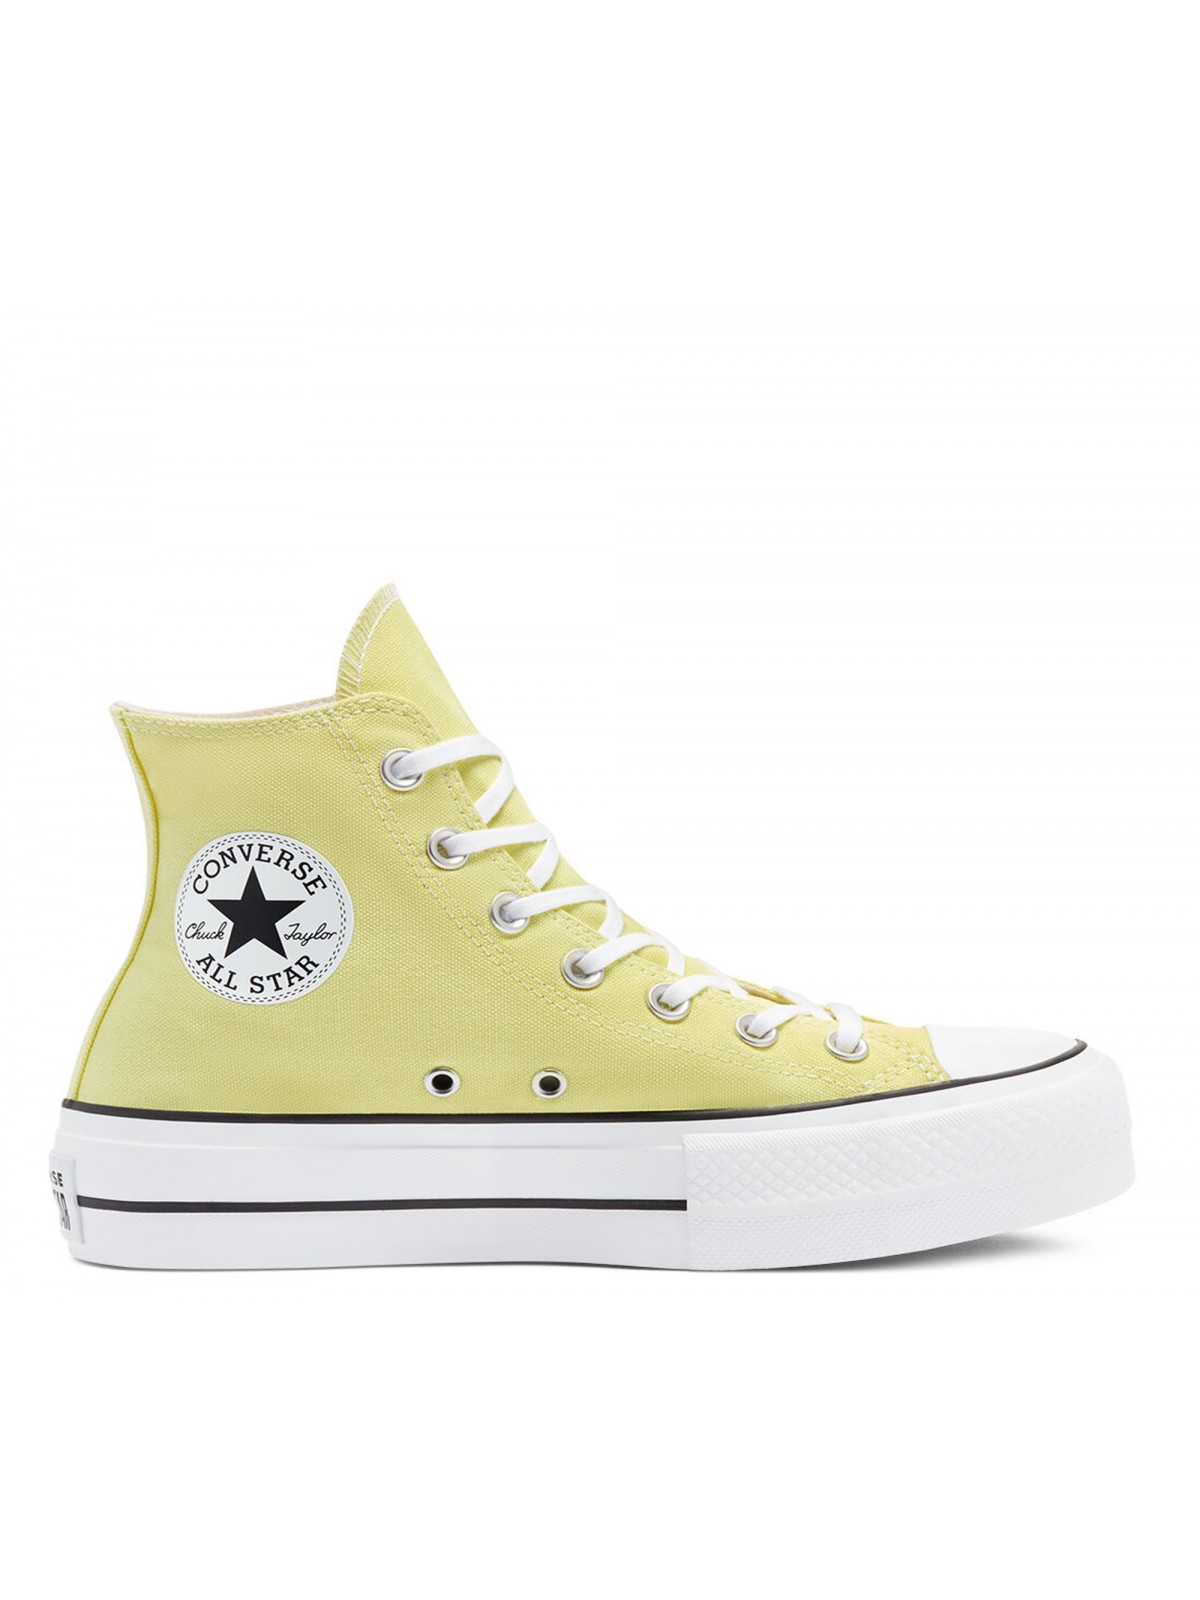 Converse Chuck Taylor all star Lift toile plateforme zitron